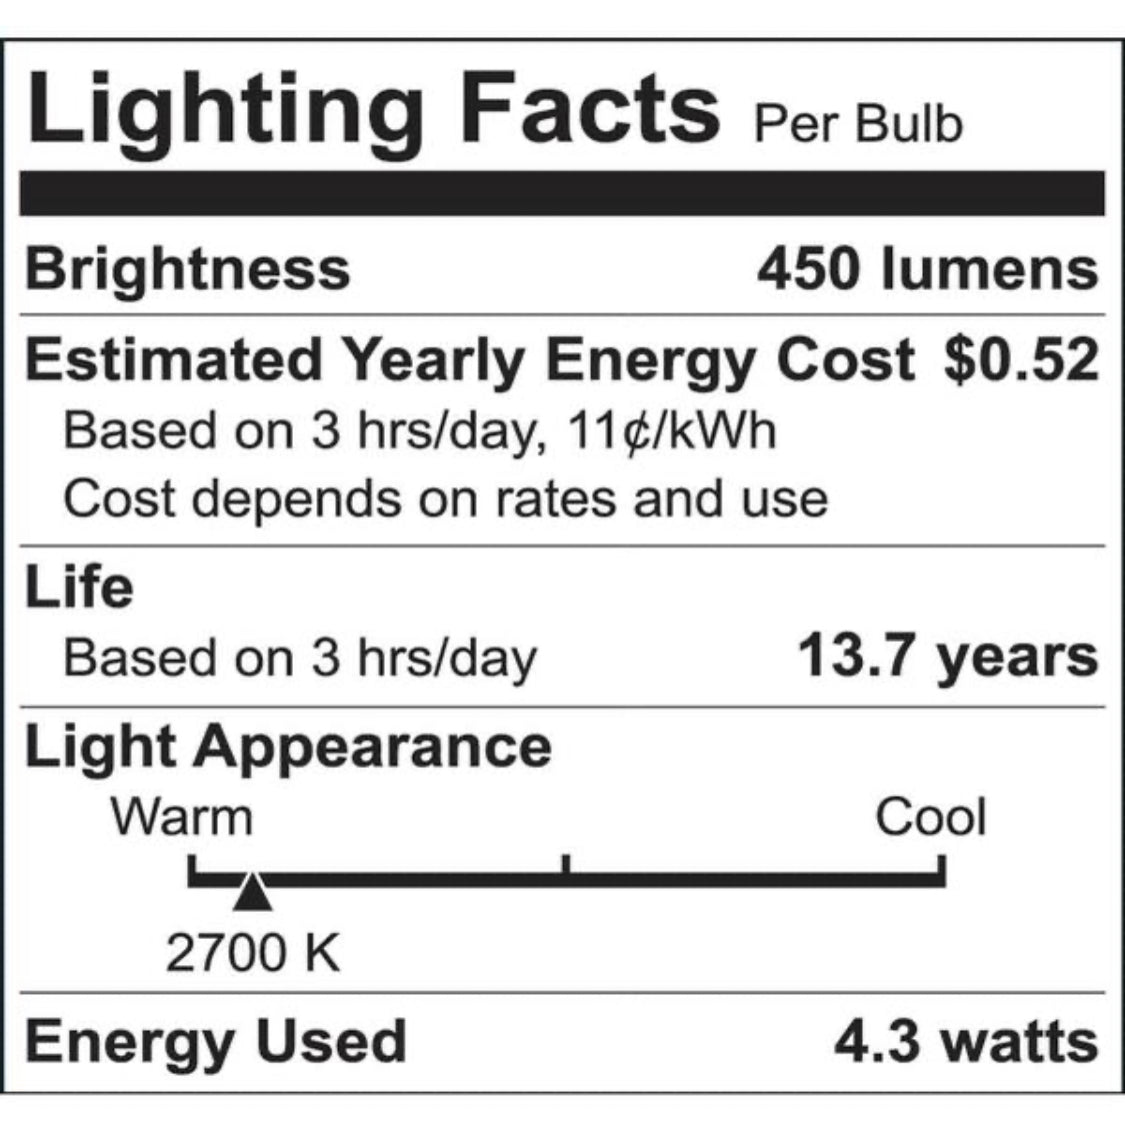 EcoSmart 40-Watt Equivalent A19 General Purpose Dimmable Clear Glass Filament Vintage Style LED Light Bulb Soft White (3-Pack) - Damaged Box